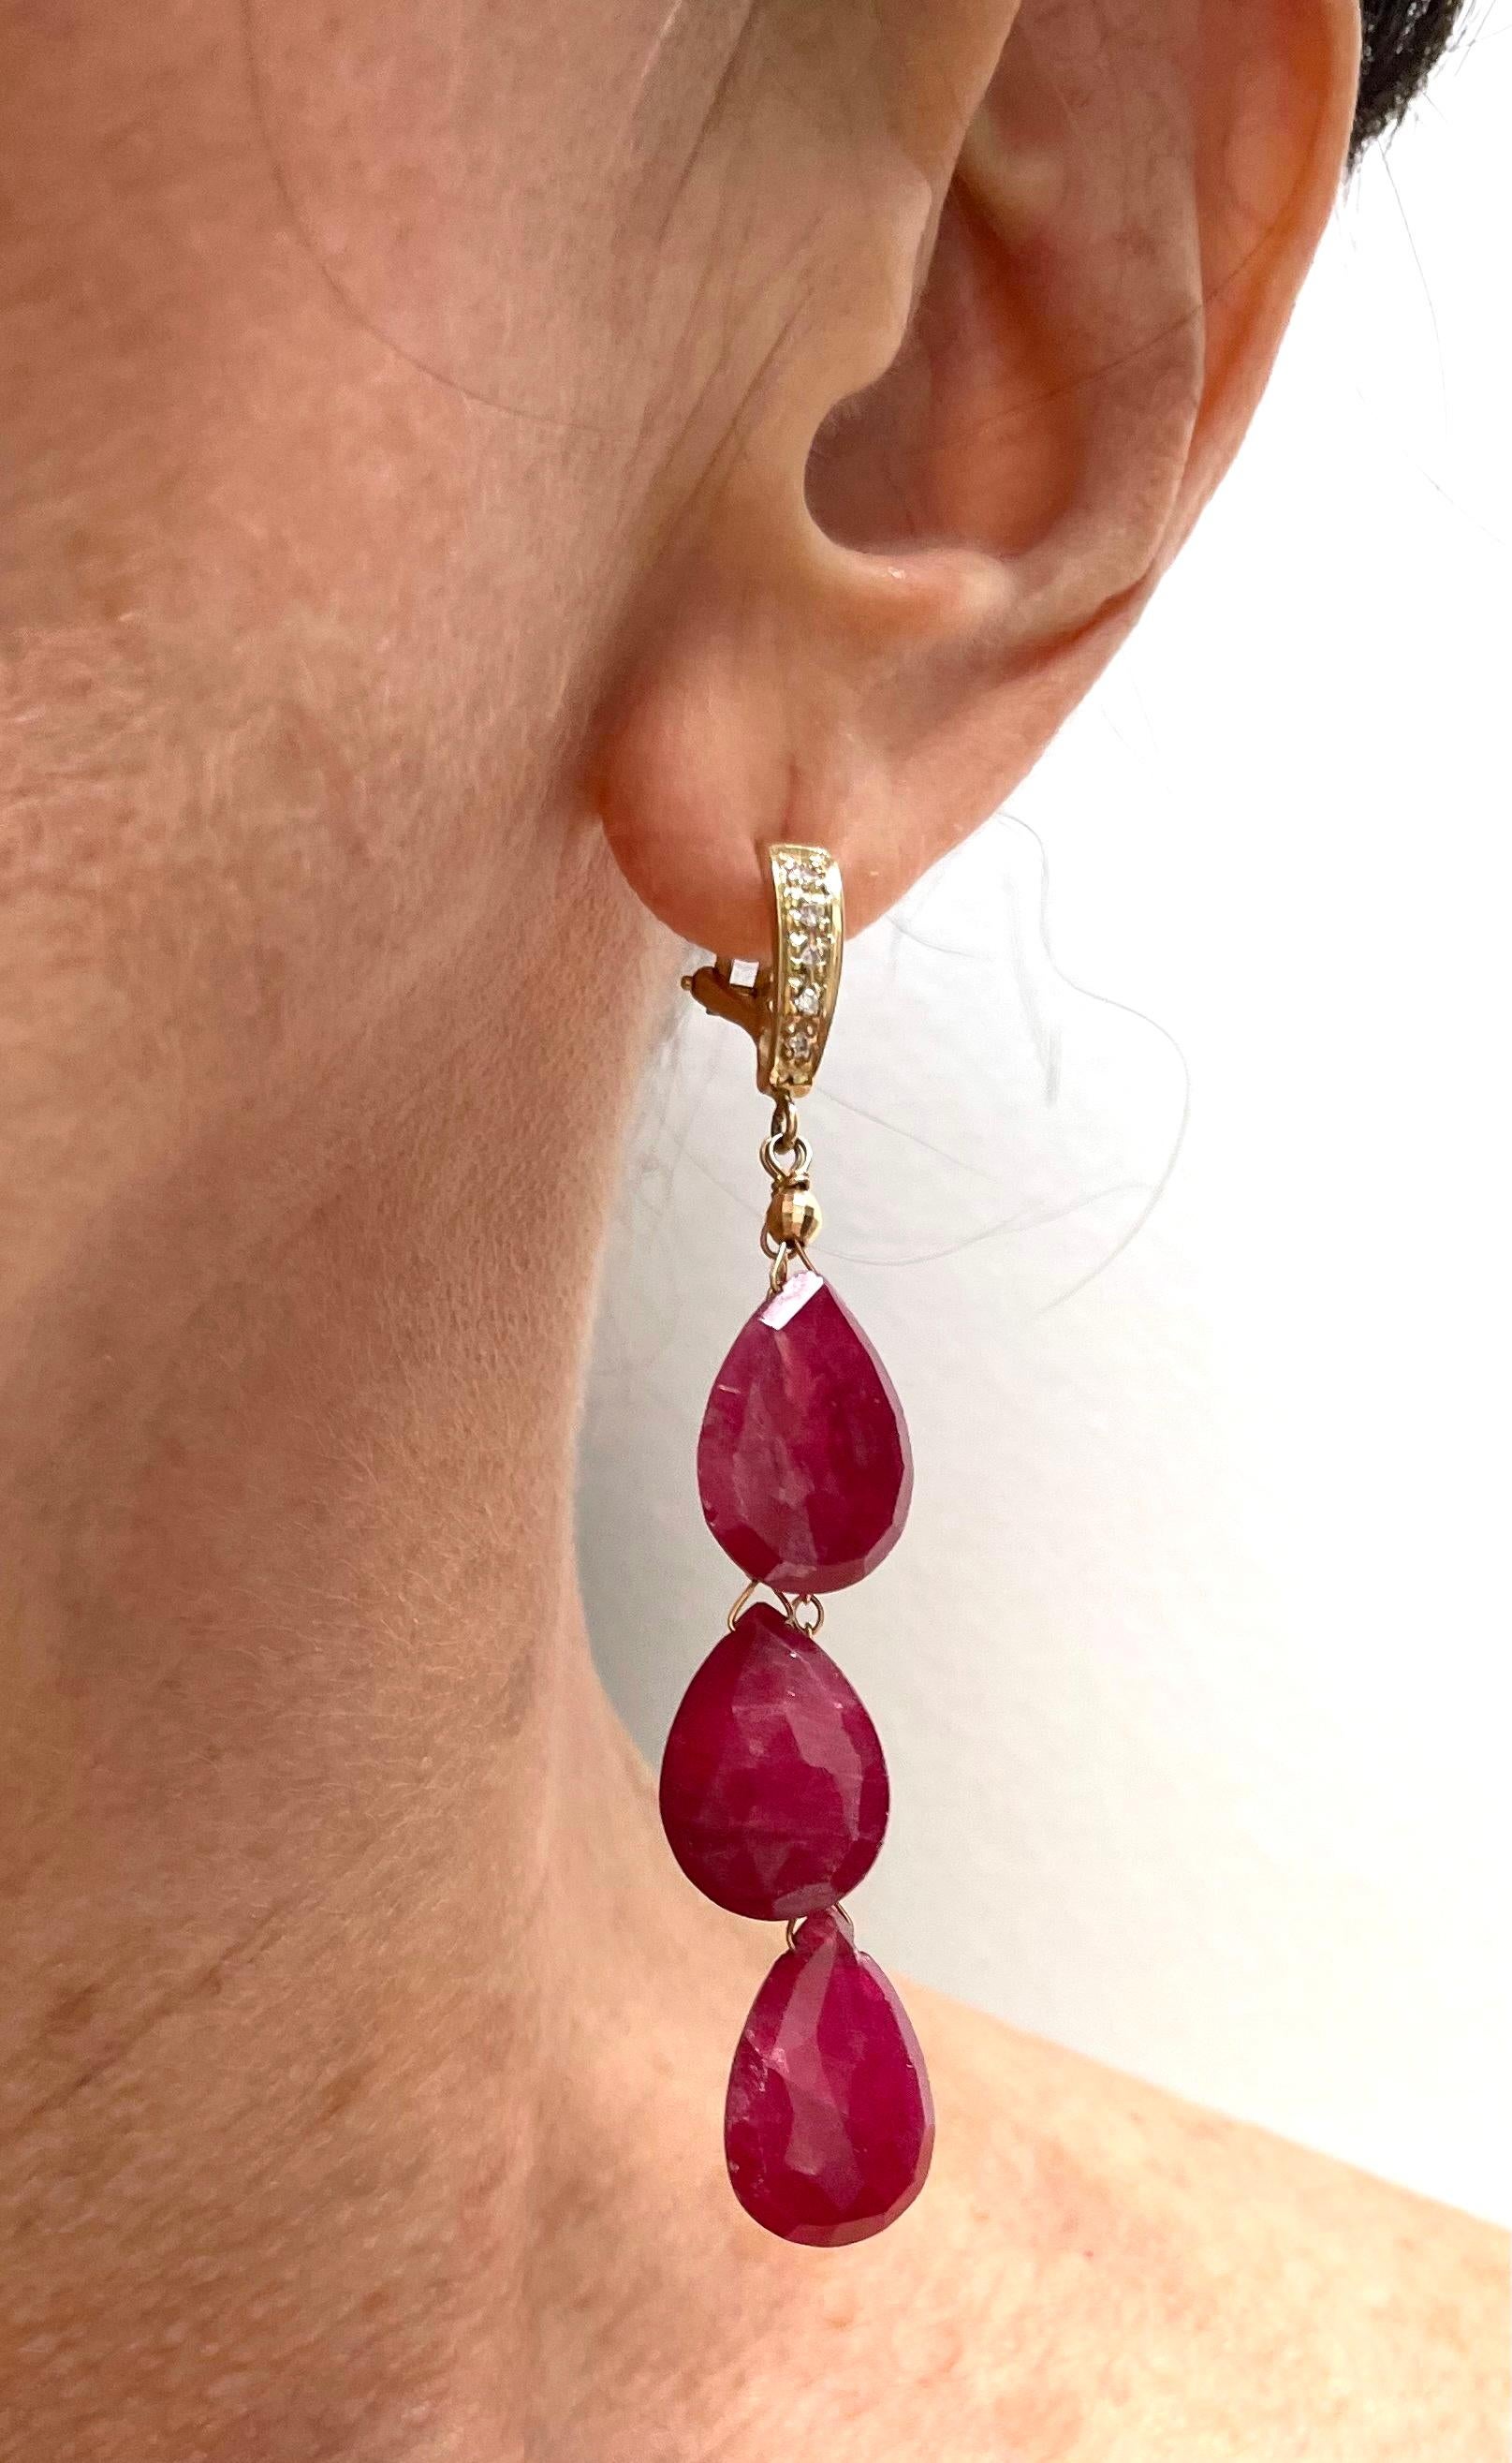 Description
Elegant, Feminine and Graceful, does this sound like you? To further “gild the lily”, adorn yourself with these rich red opaque pear shape beauties. Thoughtfully designed to be lightweight, yet prominent to make a bold color statement